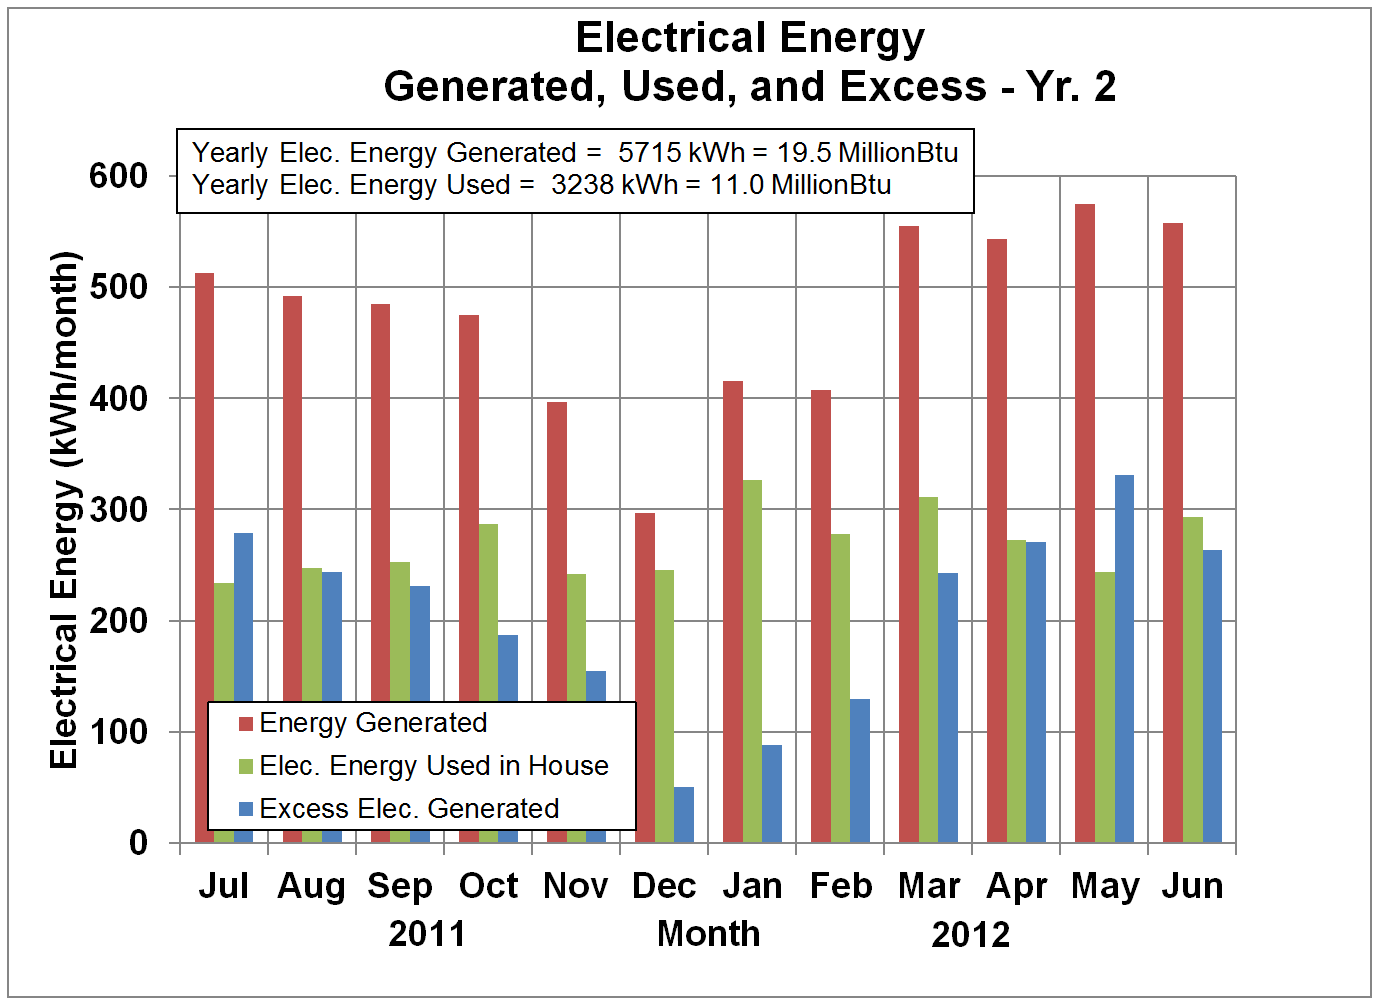 Electrical Energy Generated, Used, and Banked - Yr. 2